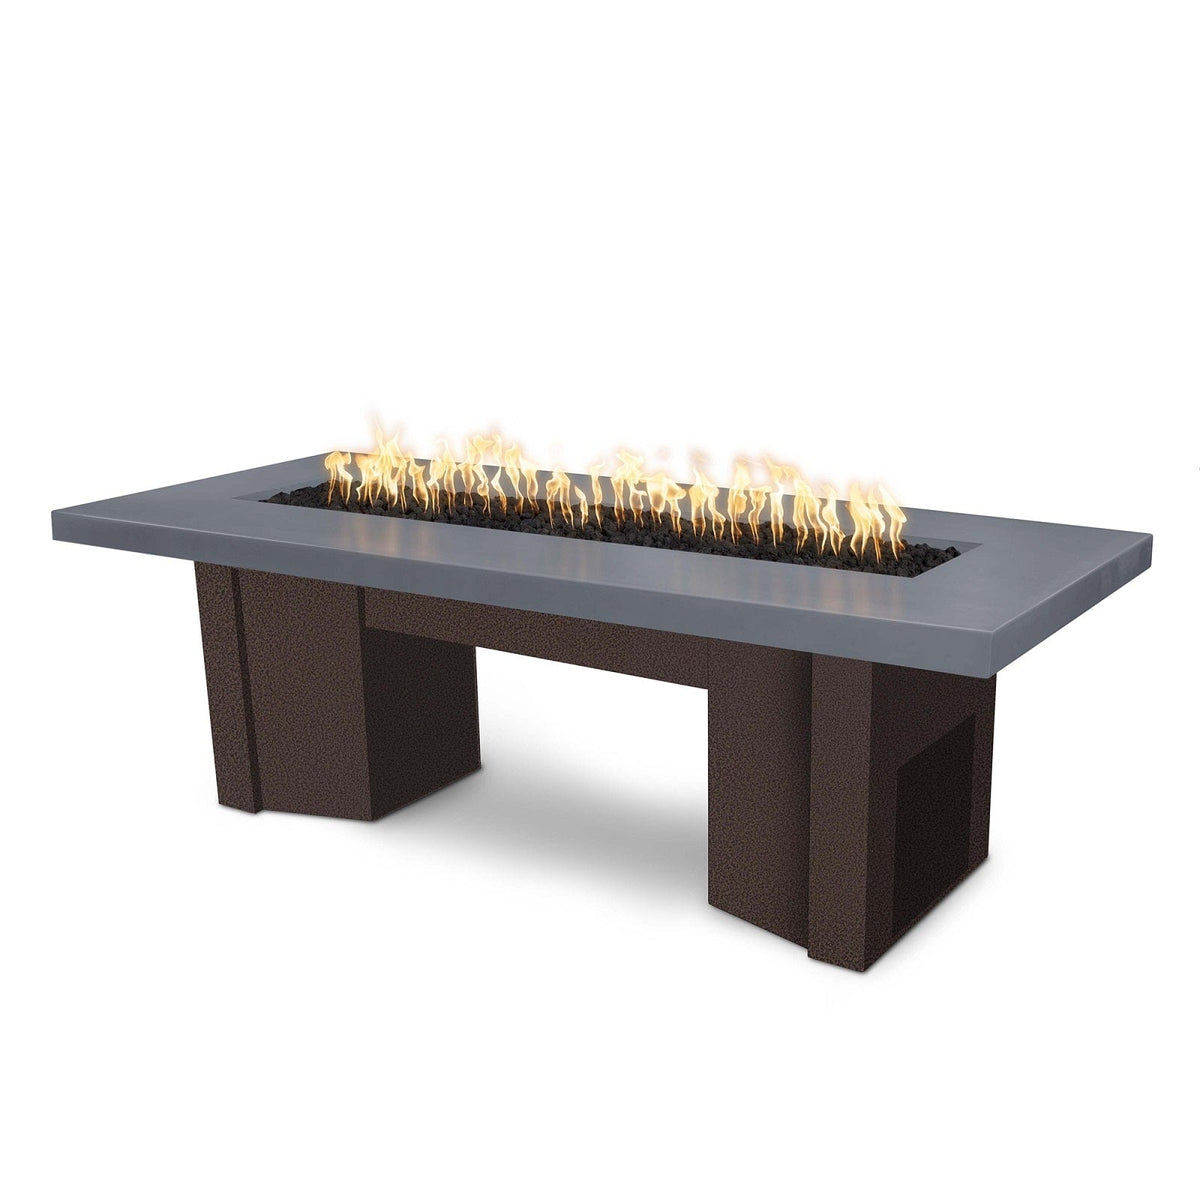 The Outdoor Plus Fire Features Gray (-GRY) / Copper Vein Powder Coated Steel (-CPV) The Outdoor Plus 60&quot; Alameda Fire Table Smooth Concrete in Natural Gas - 12V Electronic Ignition / OPT-ALMGFRC60E12V-NG